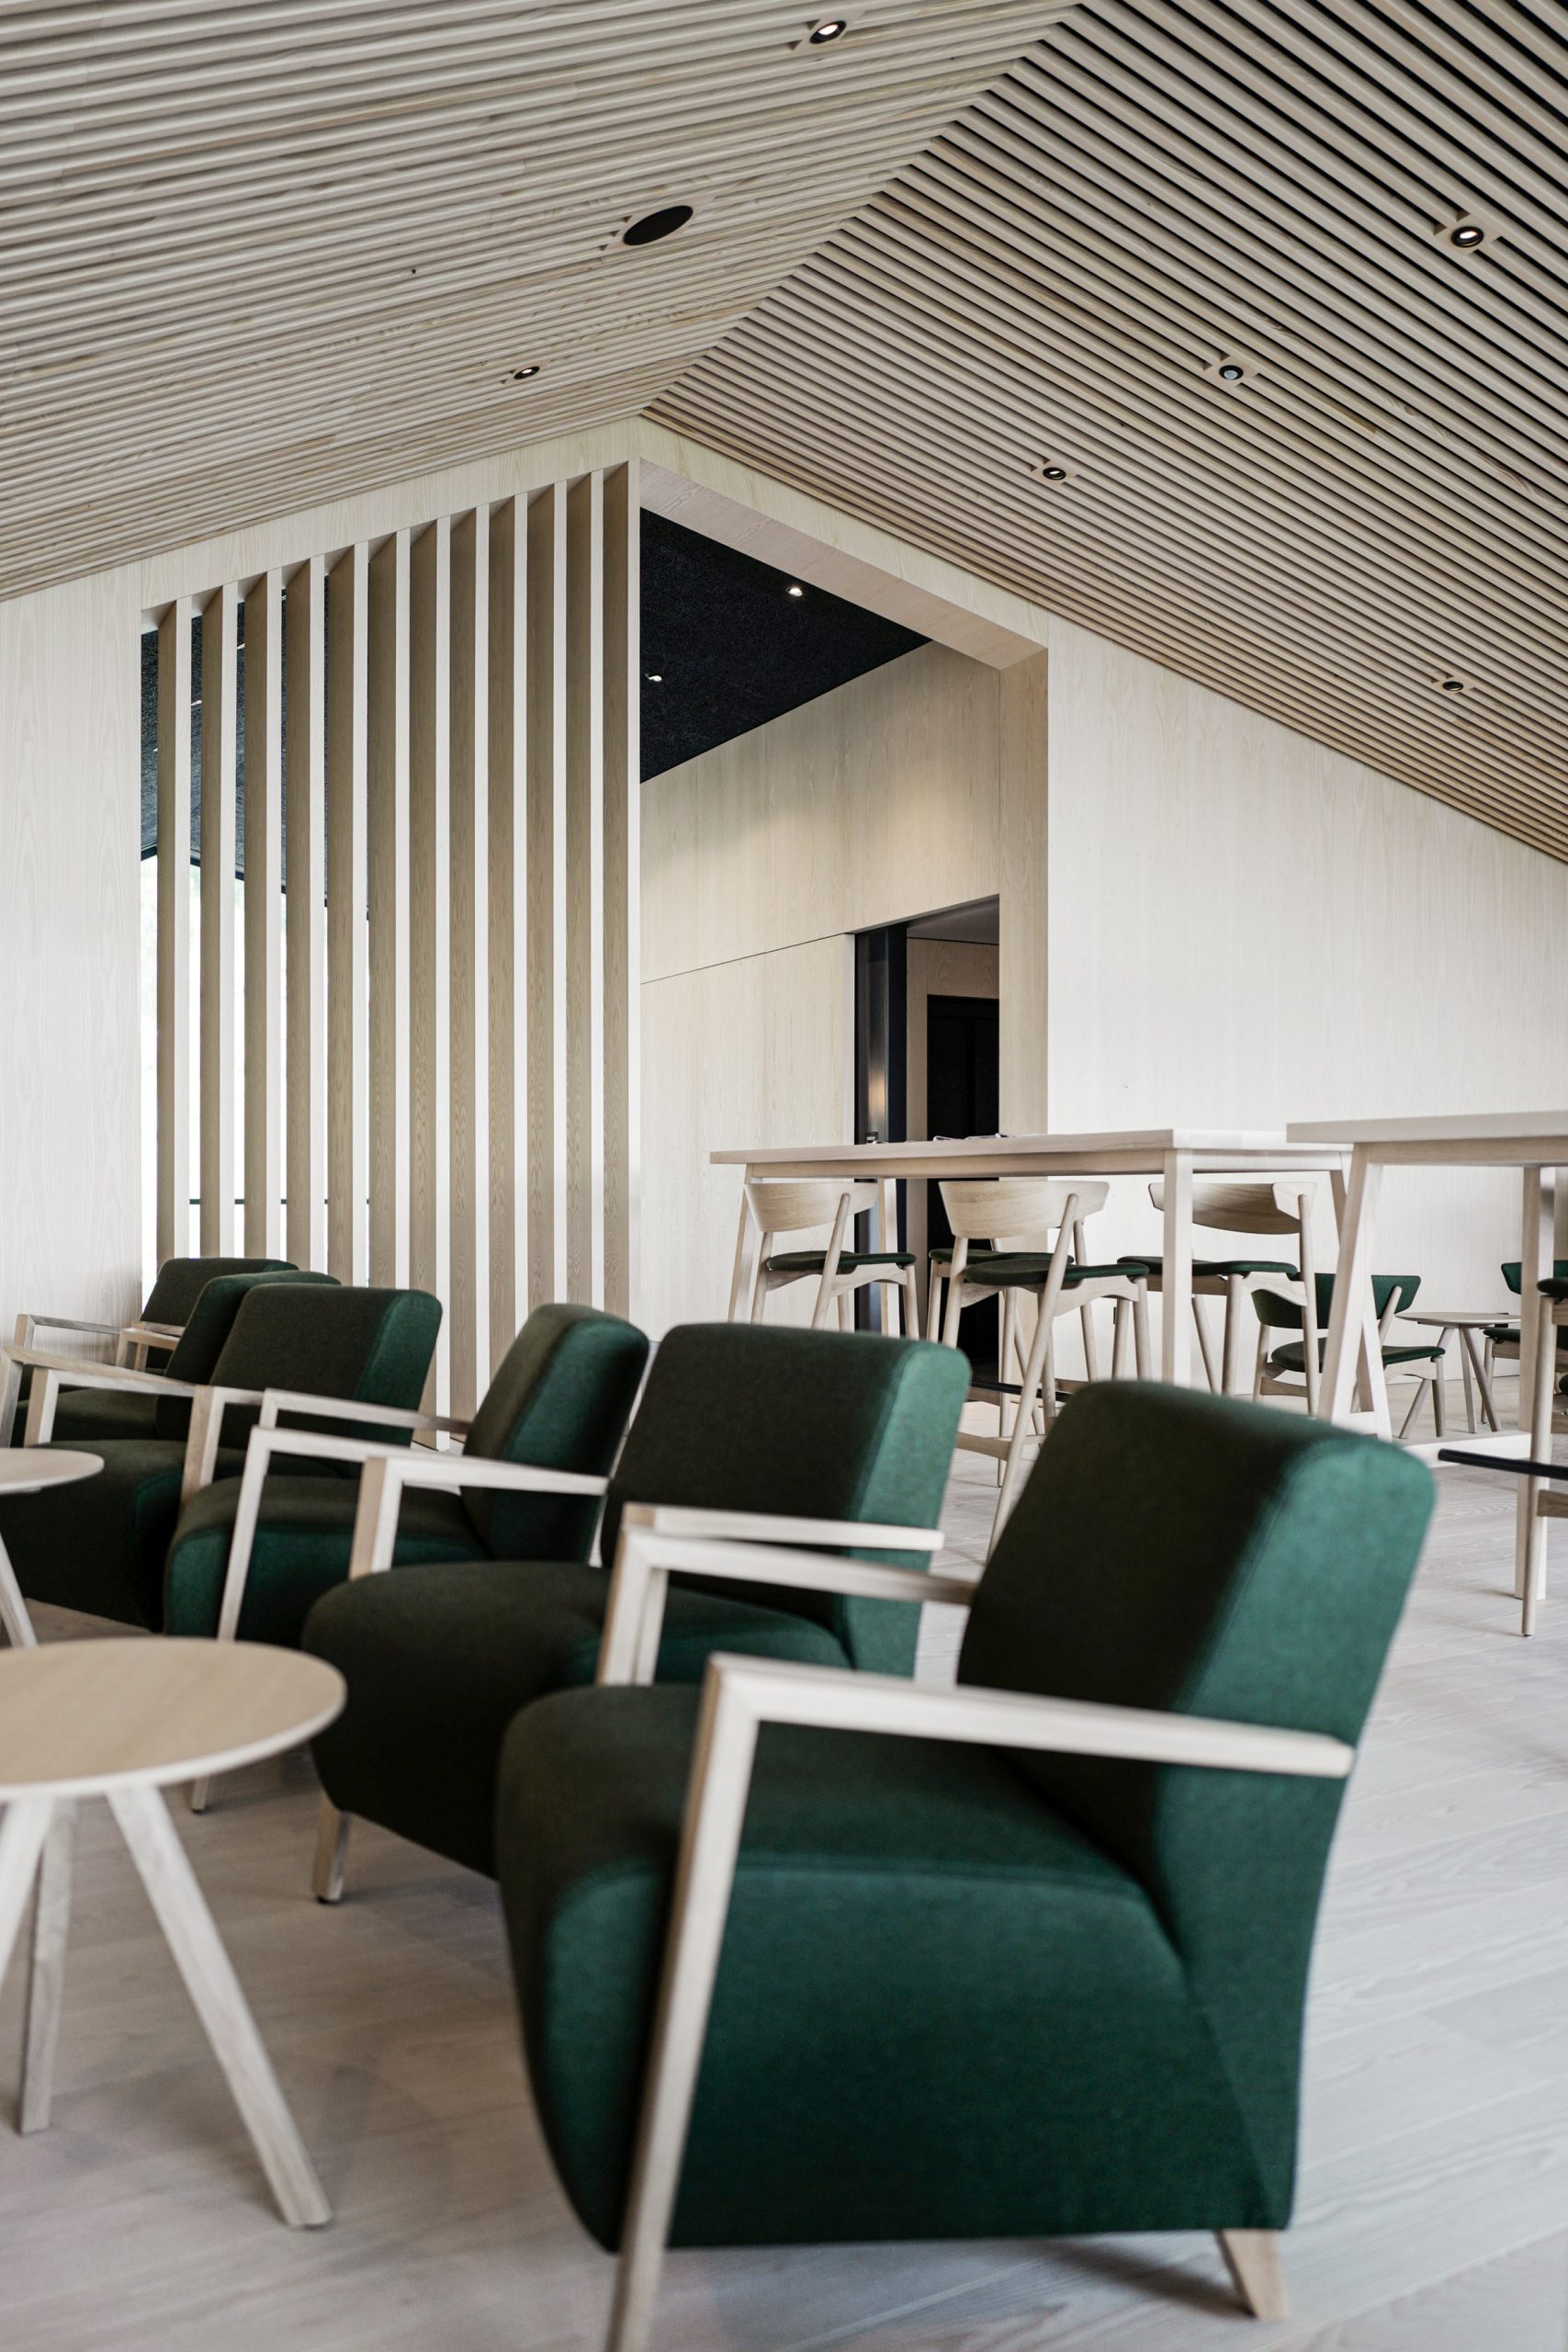 The bar inside of Hotel Milla Montis by Peter Pichler Architecture